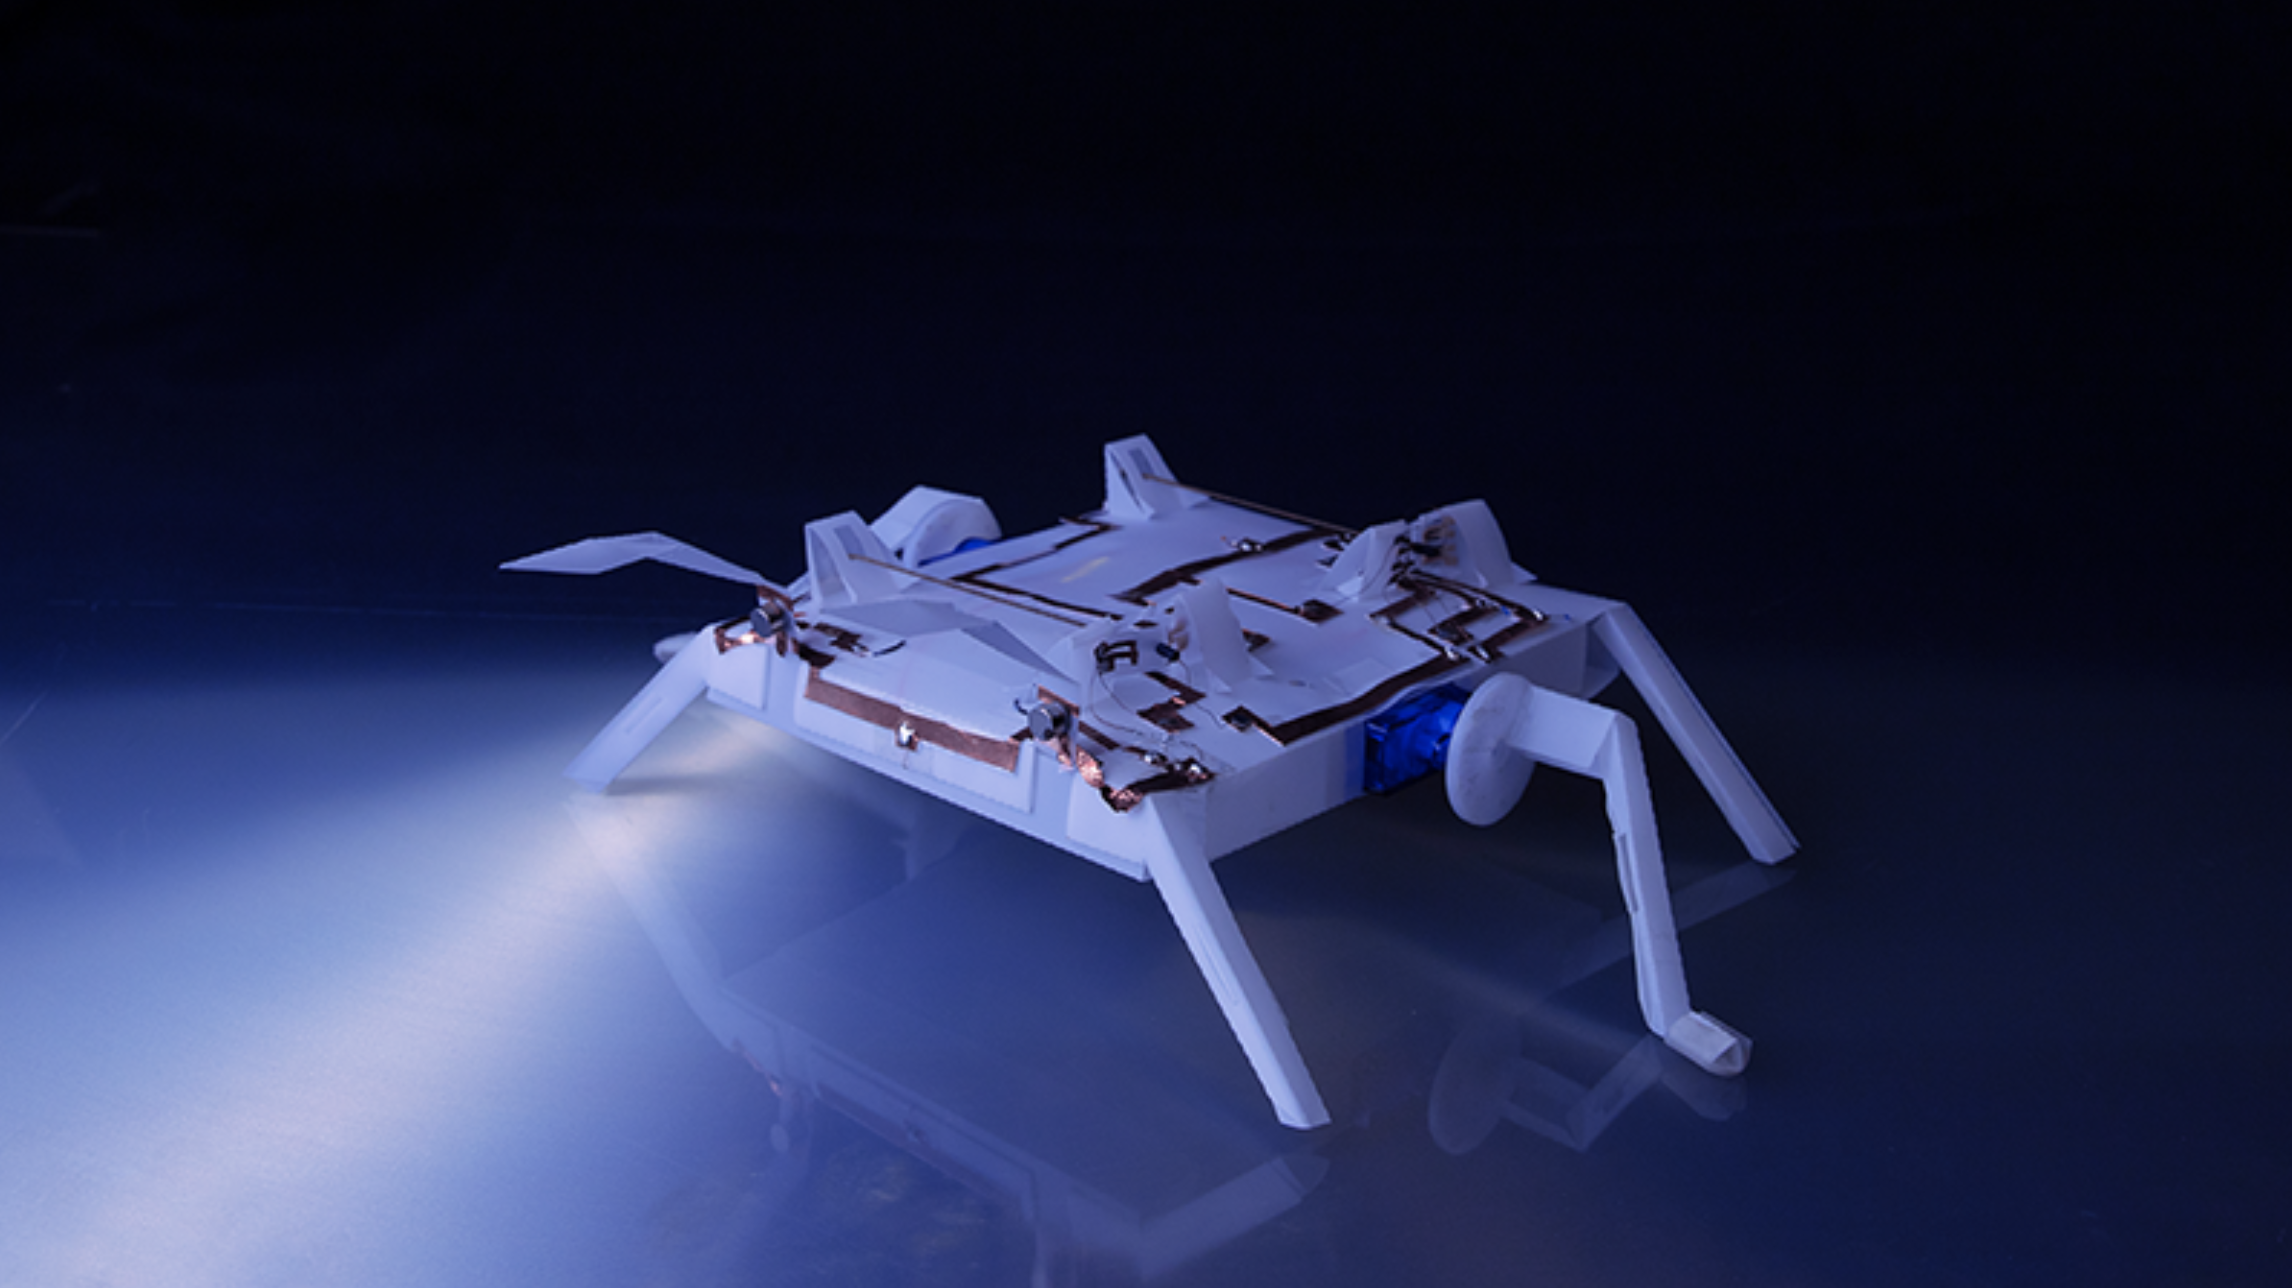 An origami-inspired robot designed by a UCLA-led team that can reverse direction when either of its antennae senses an obstacle